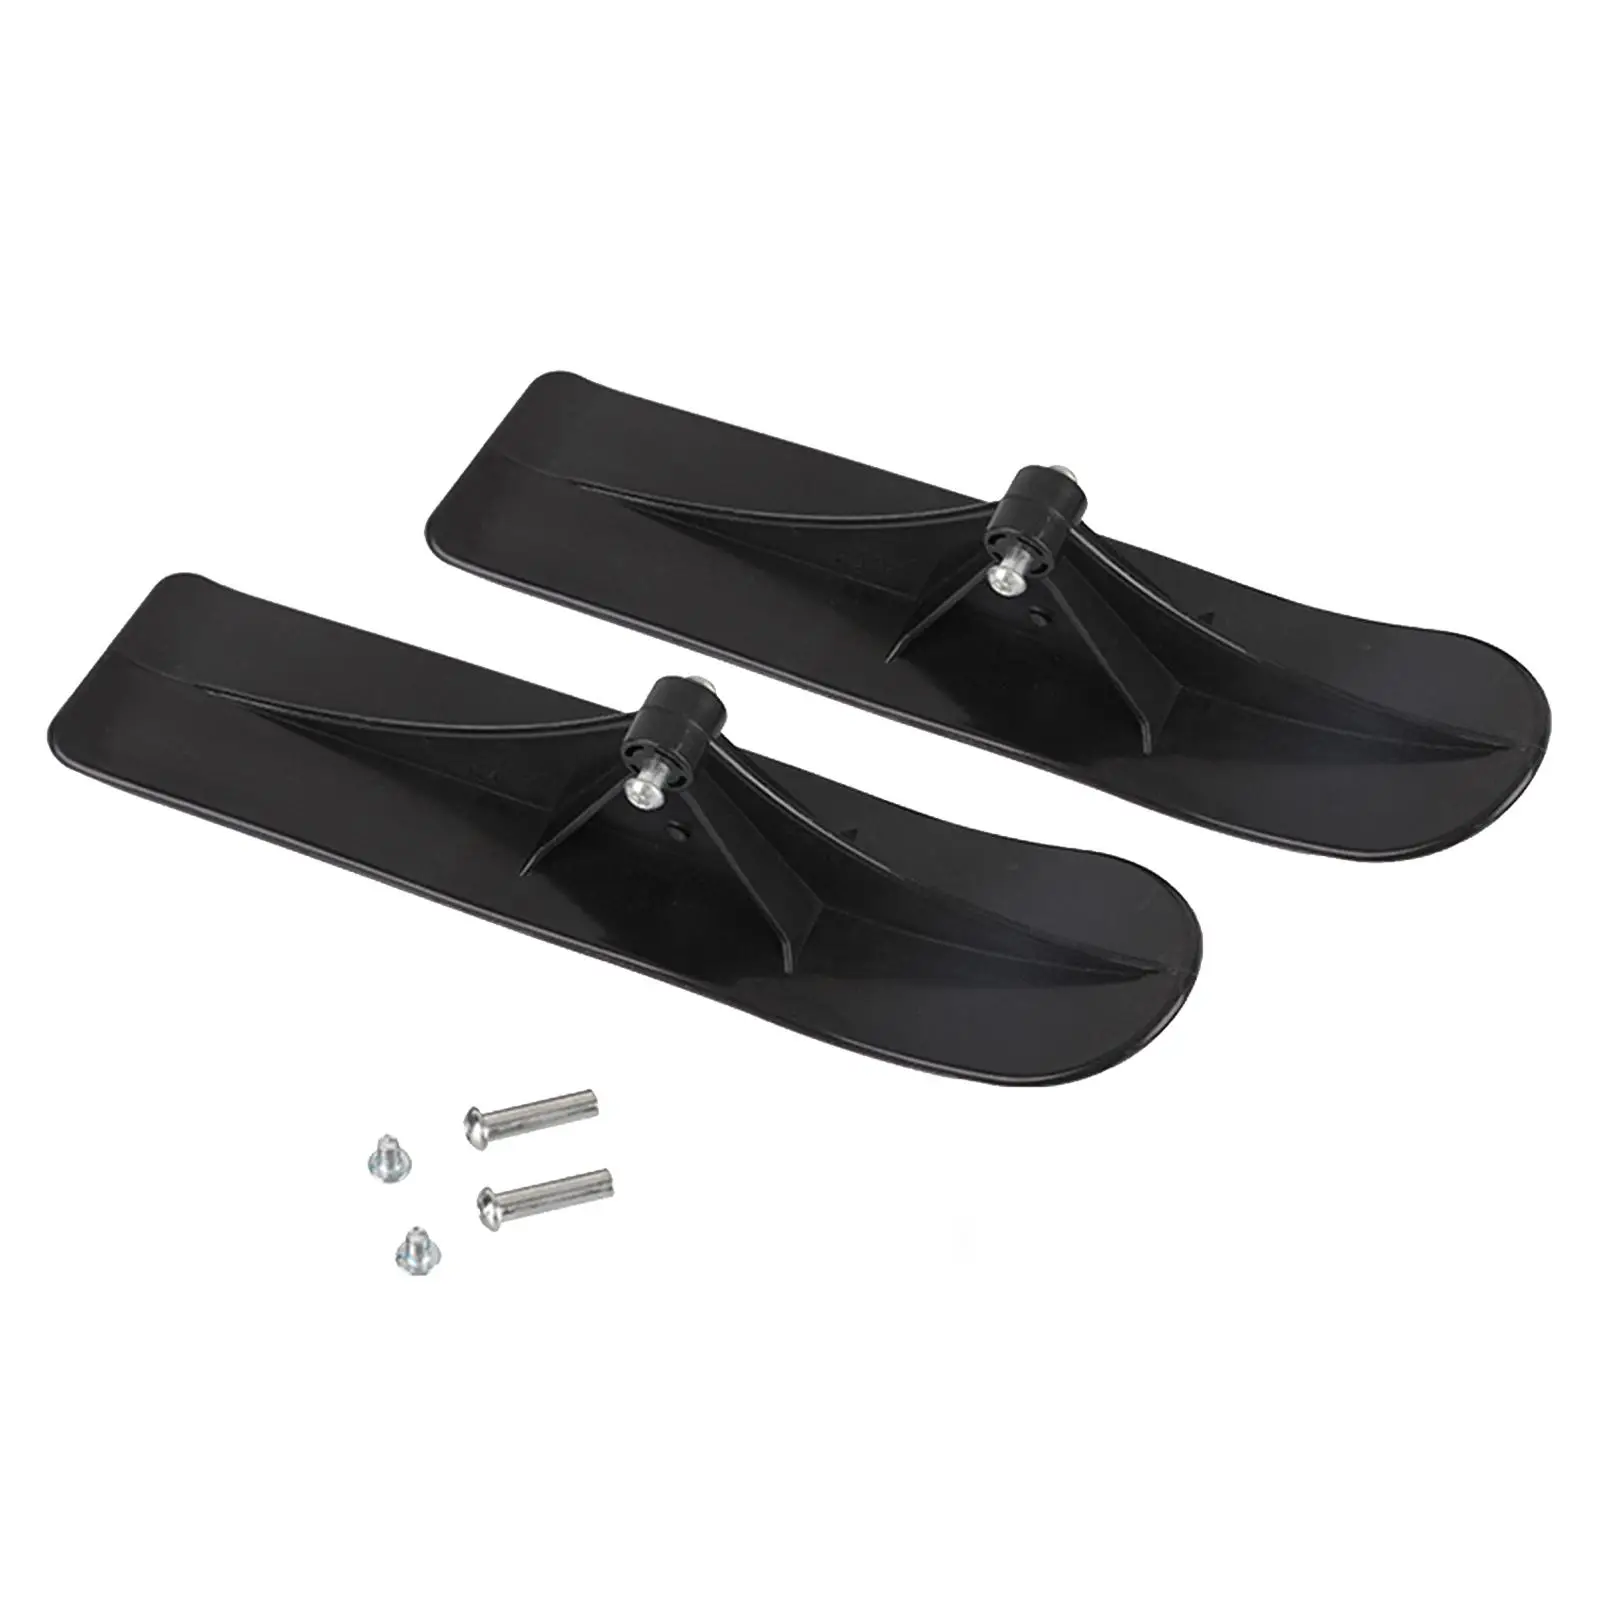 Snow Scooter Ski Sled Flat Bottom Snowmobile Attachment Durable for Novices